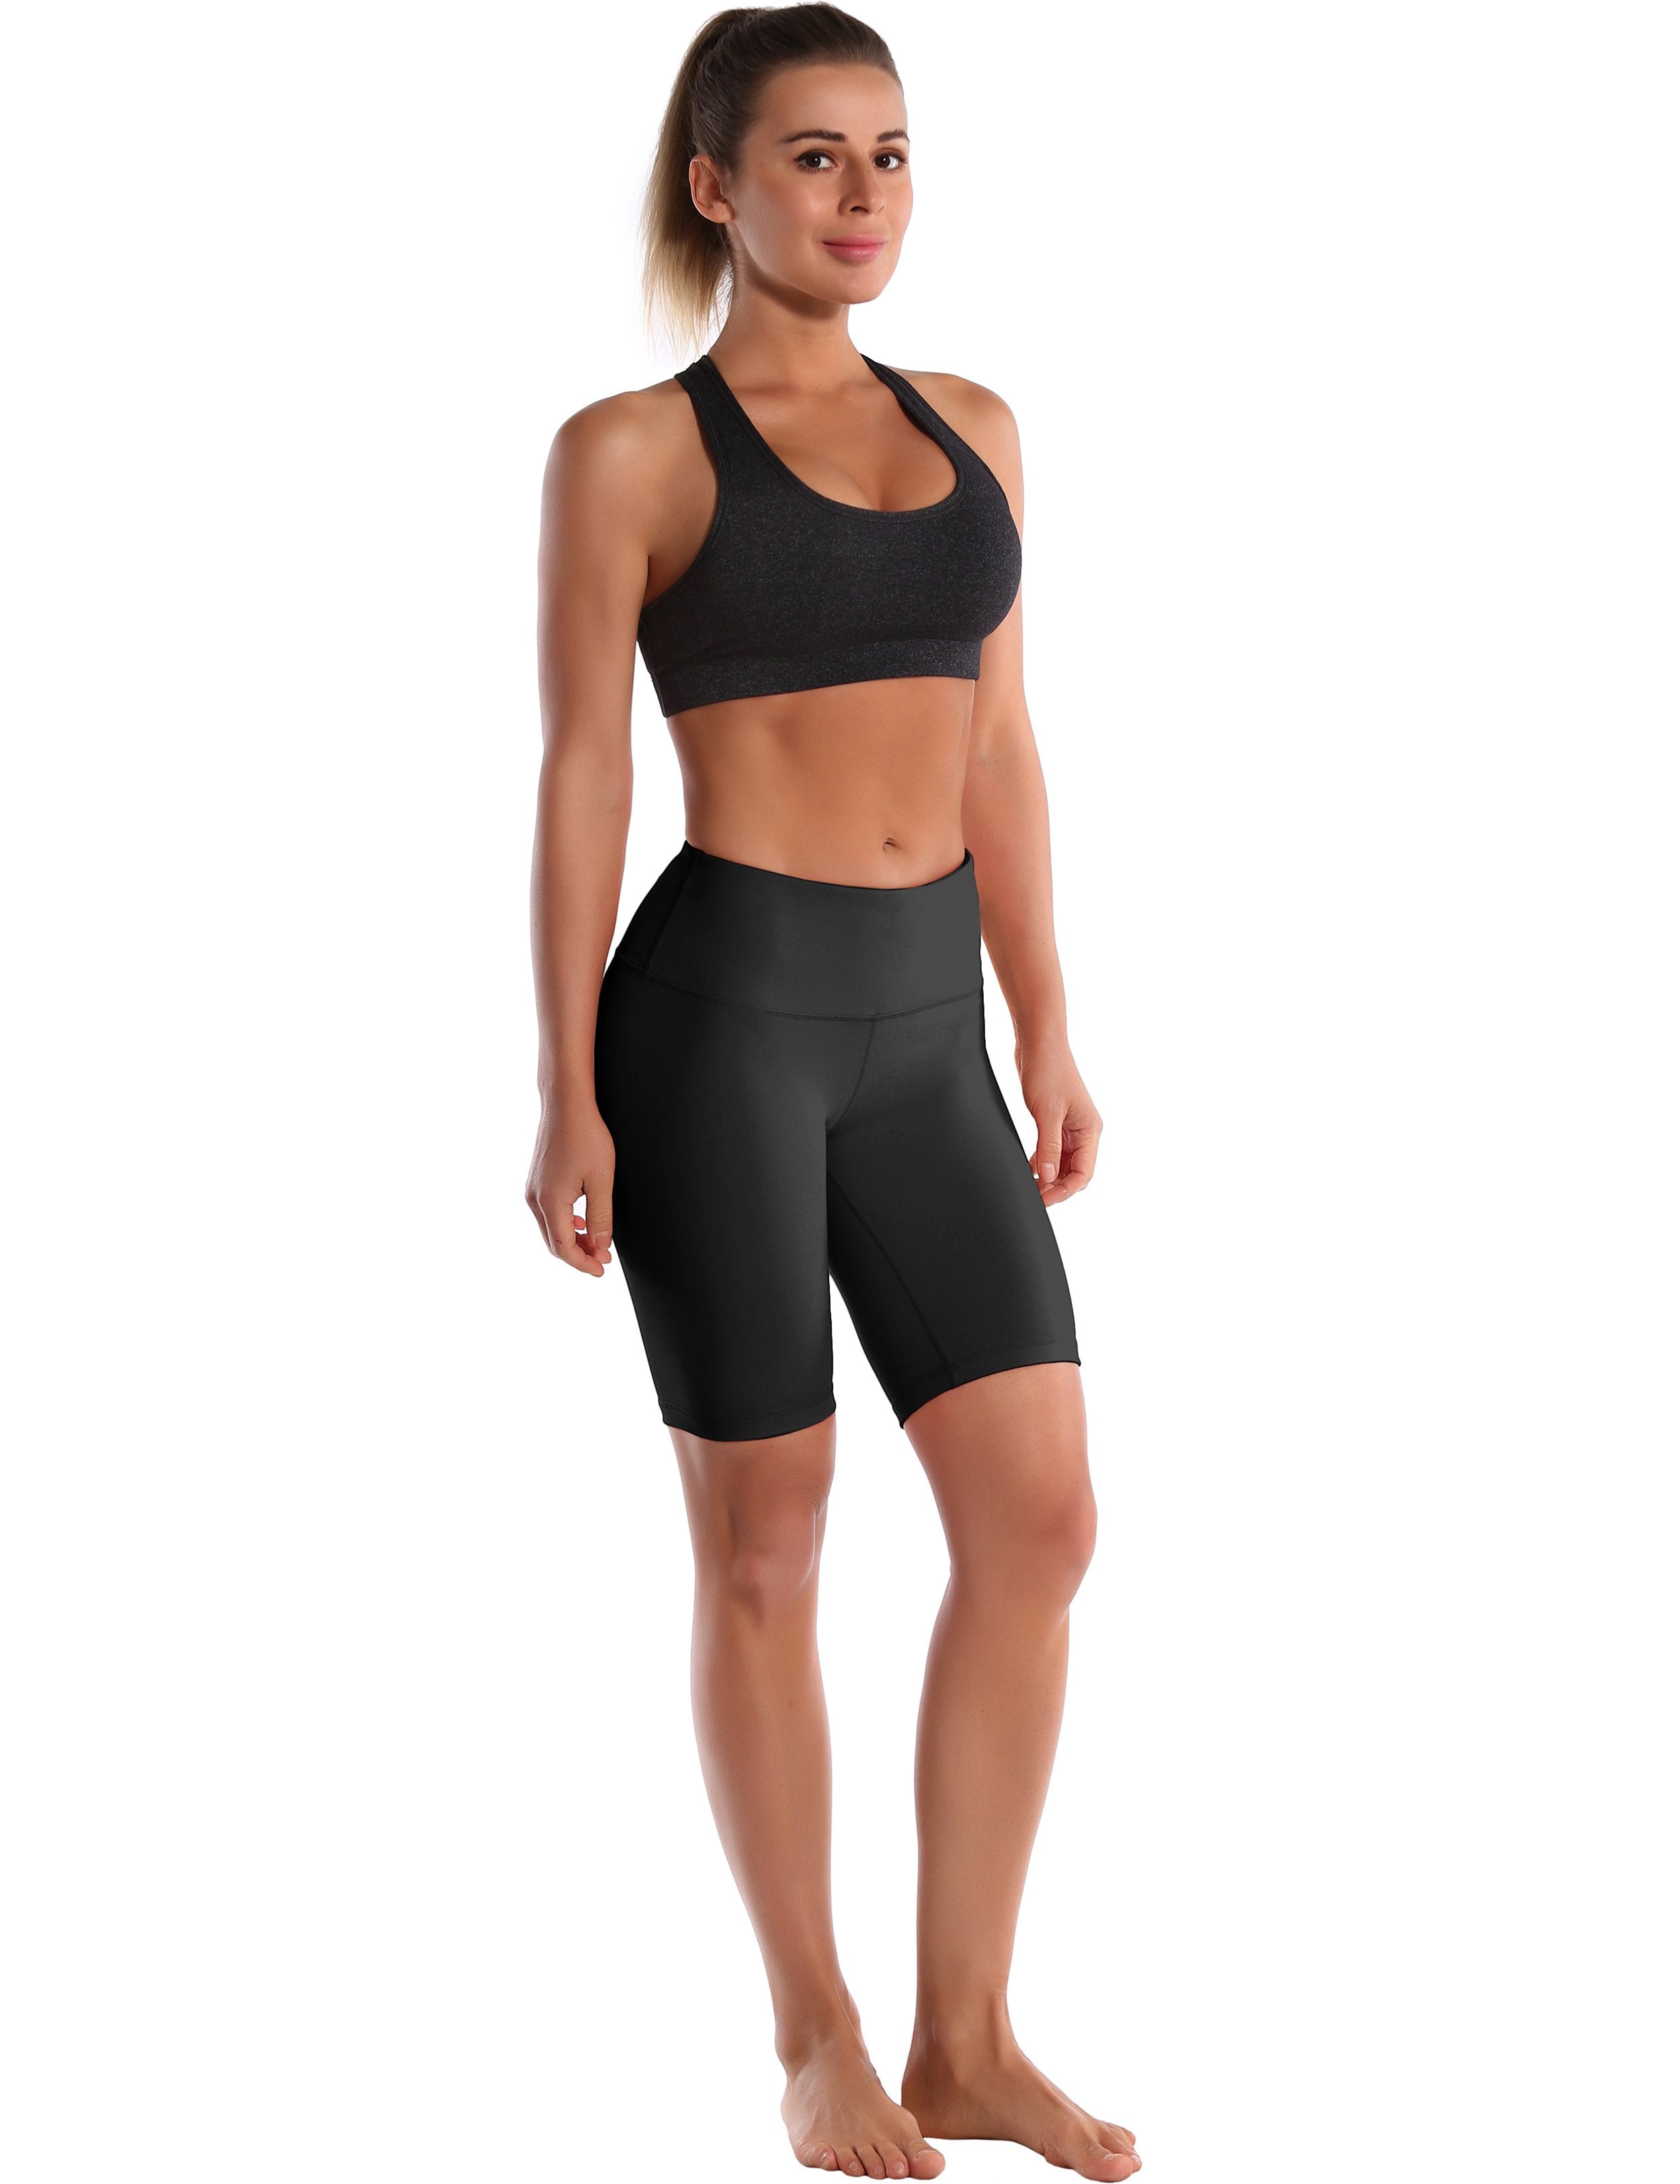 8" High Waist Golf Shorts black Sleek, soft, smooth and totally comfortable: our newest style is here. Softest-ever fabric High elasticity High density 4-way stretch Fabric doesn't attract lint easily No see-through Moisture-wicking Machine wash 75% Nylon, 25% Spandex